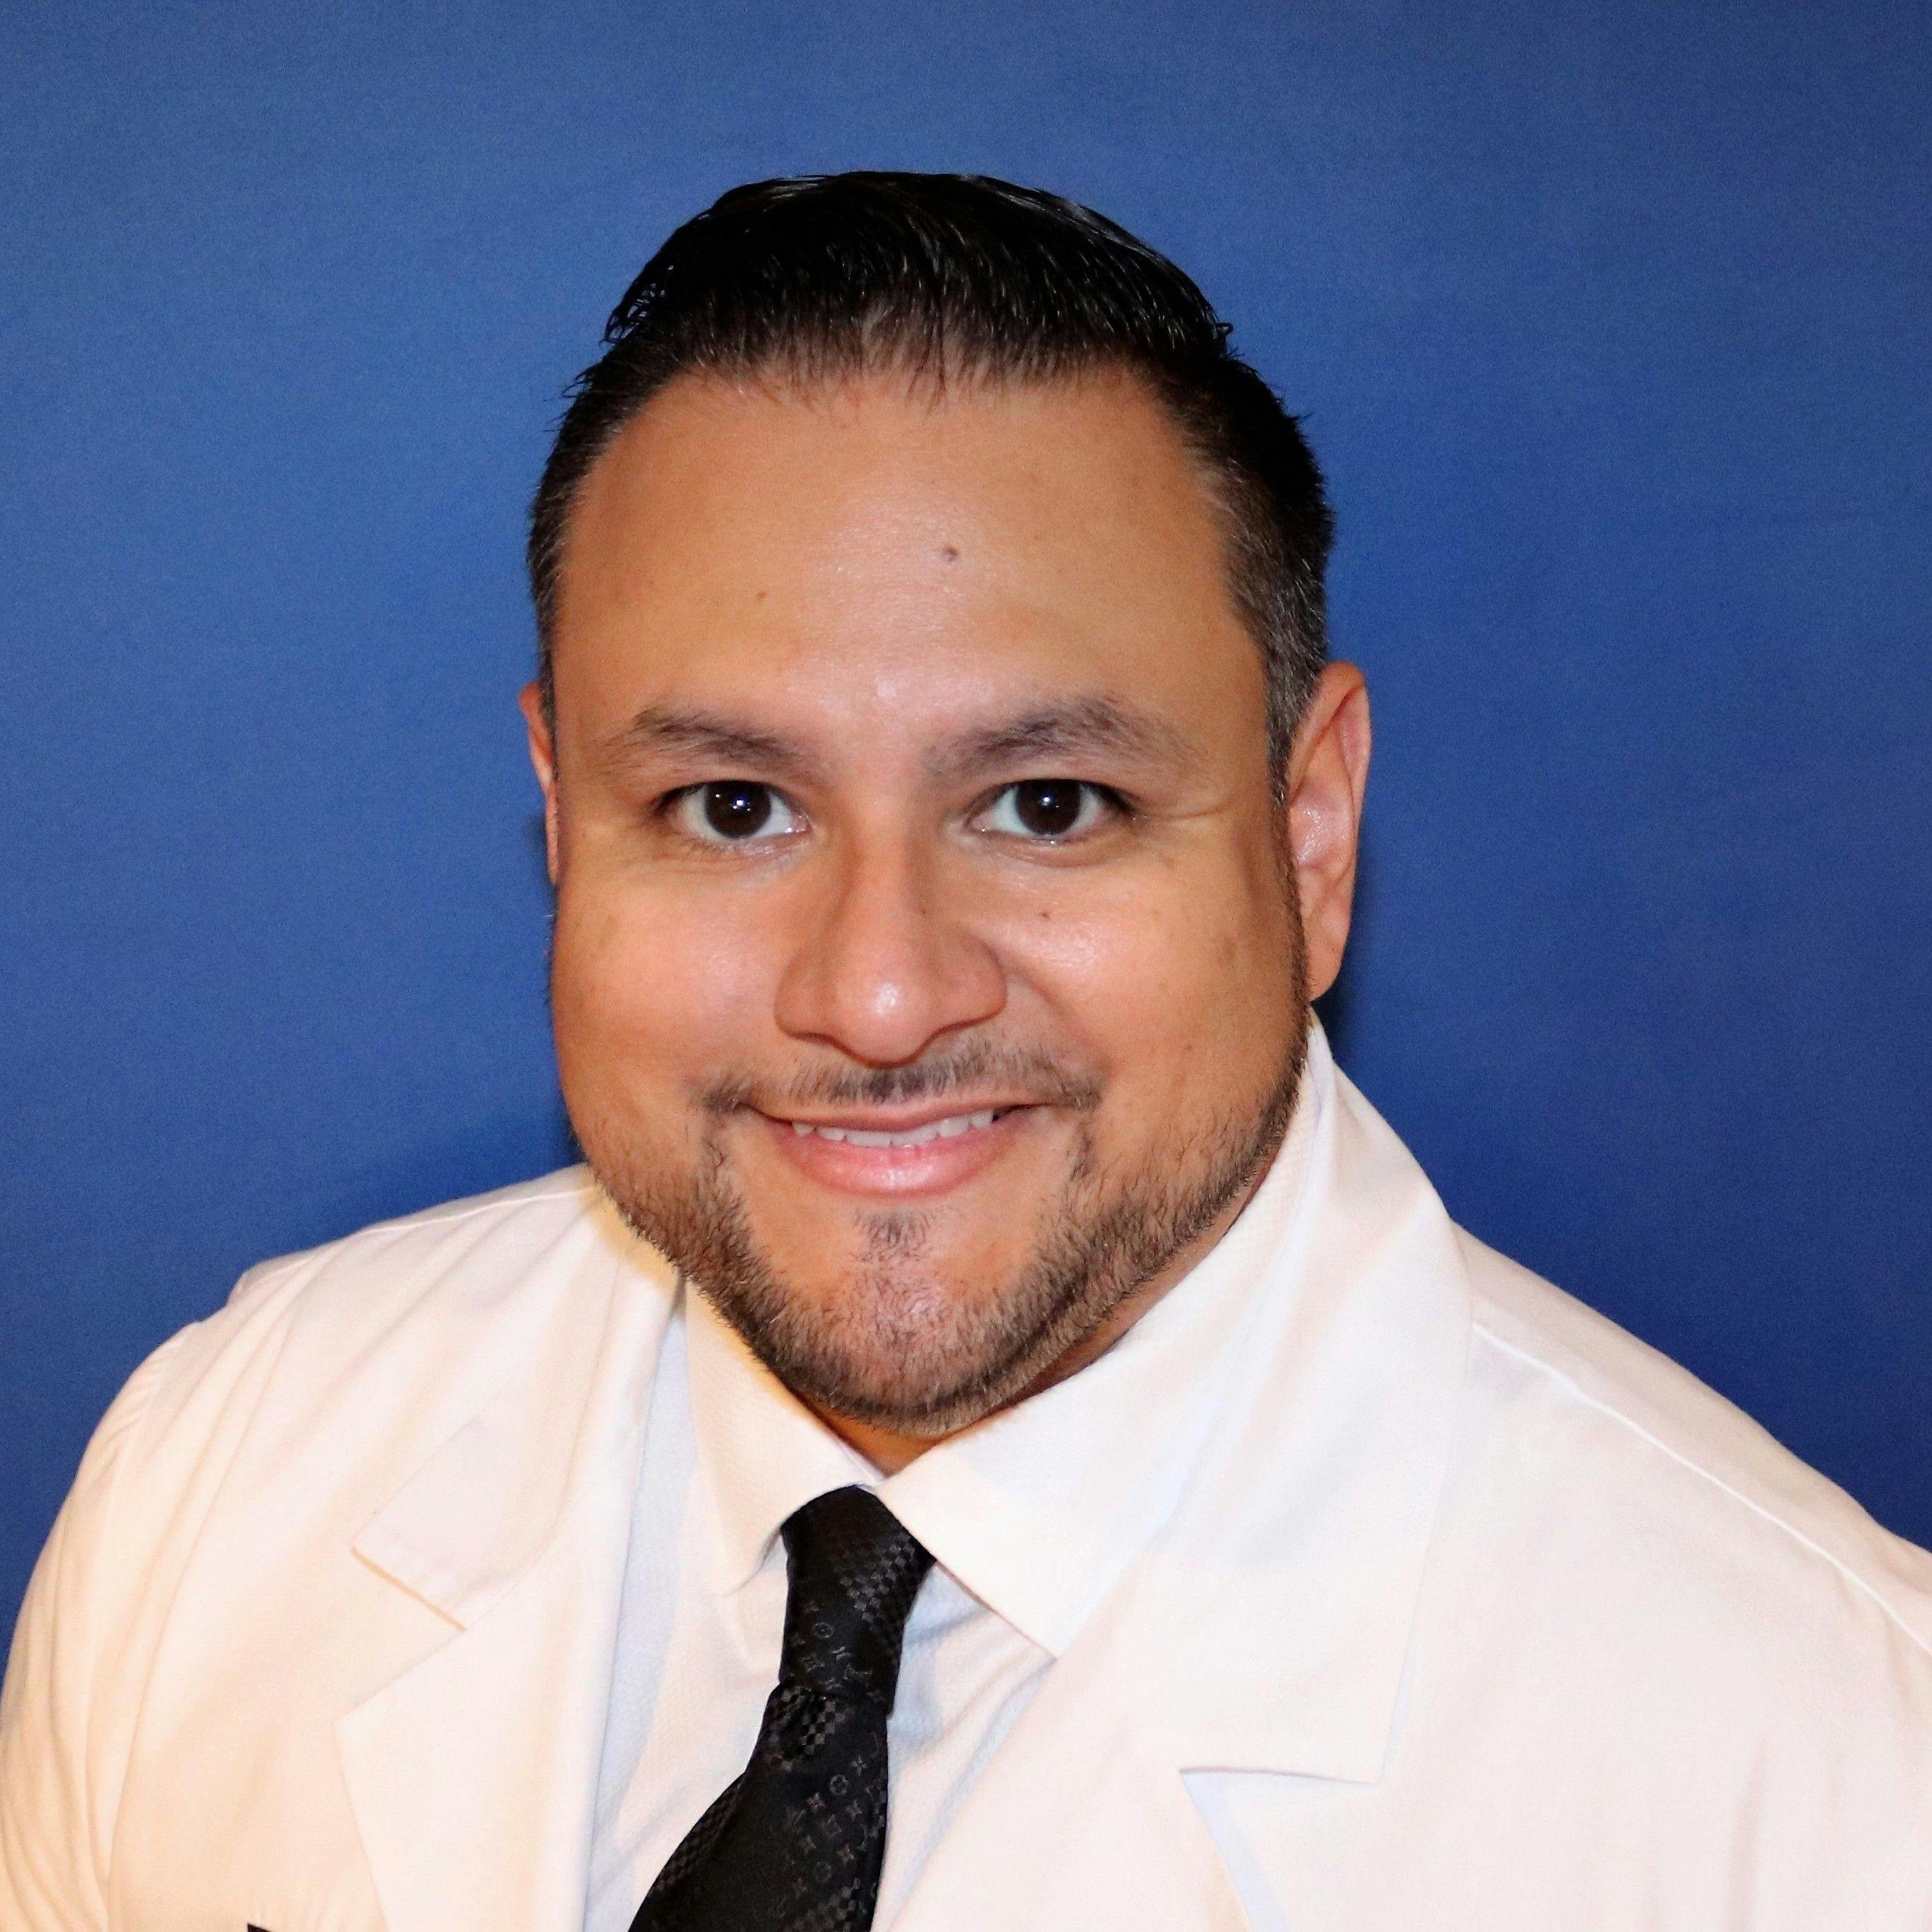 Q&A with Dr. Edward Alvarez: How to Market Cosmetic Services, Part II